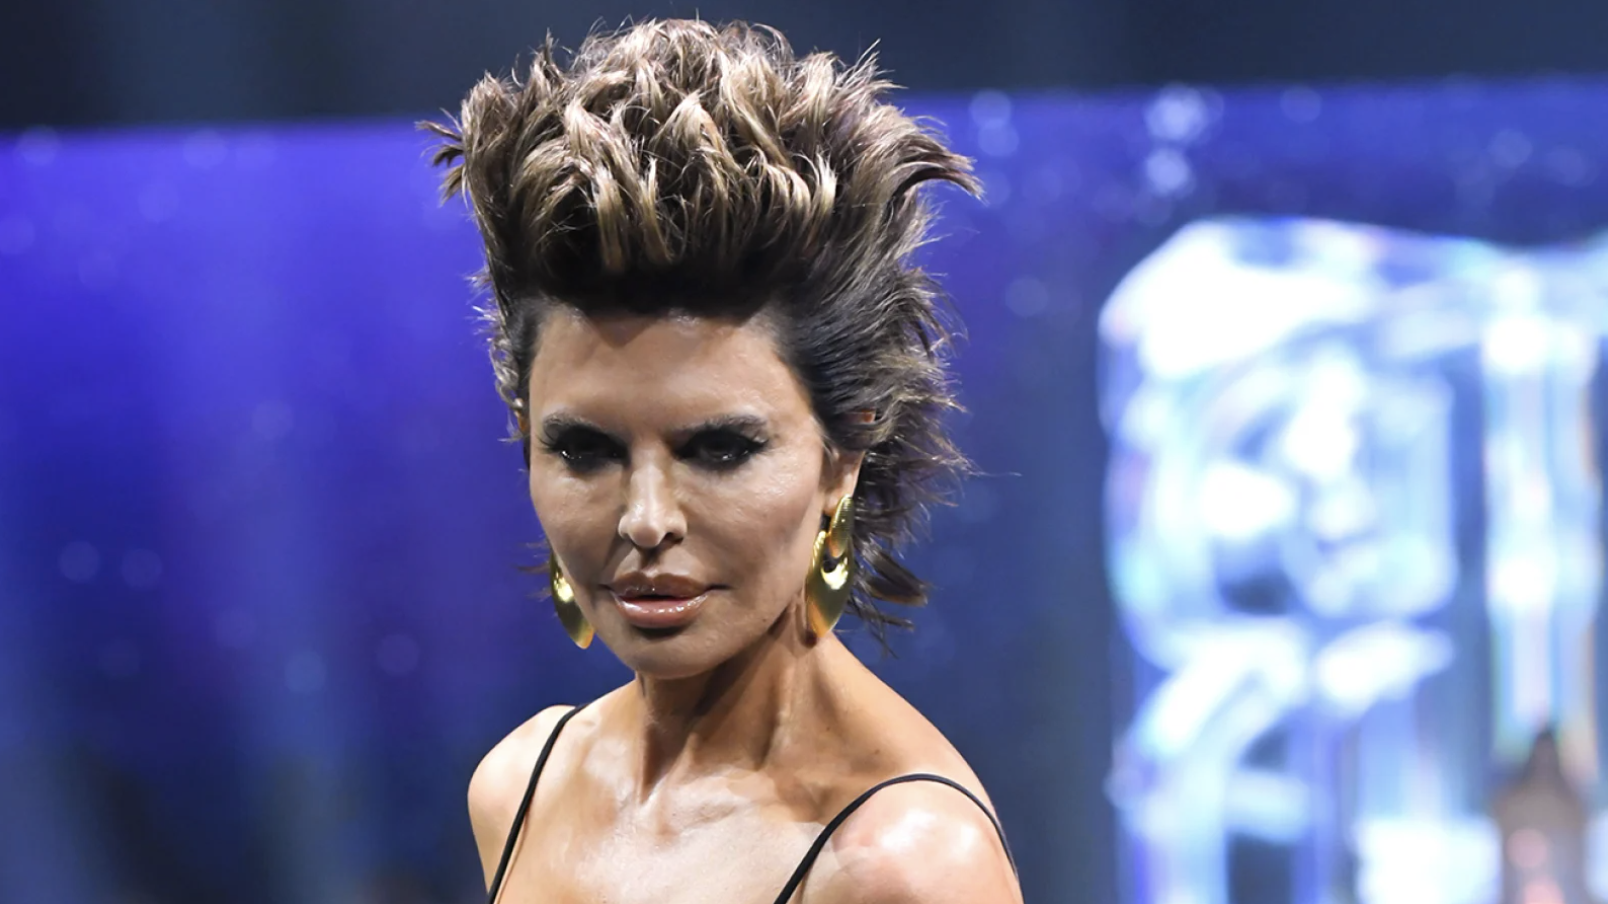 Lisa Rinna Lands New Job After ‘RHOBH’ and Fans Want Her FIRED!